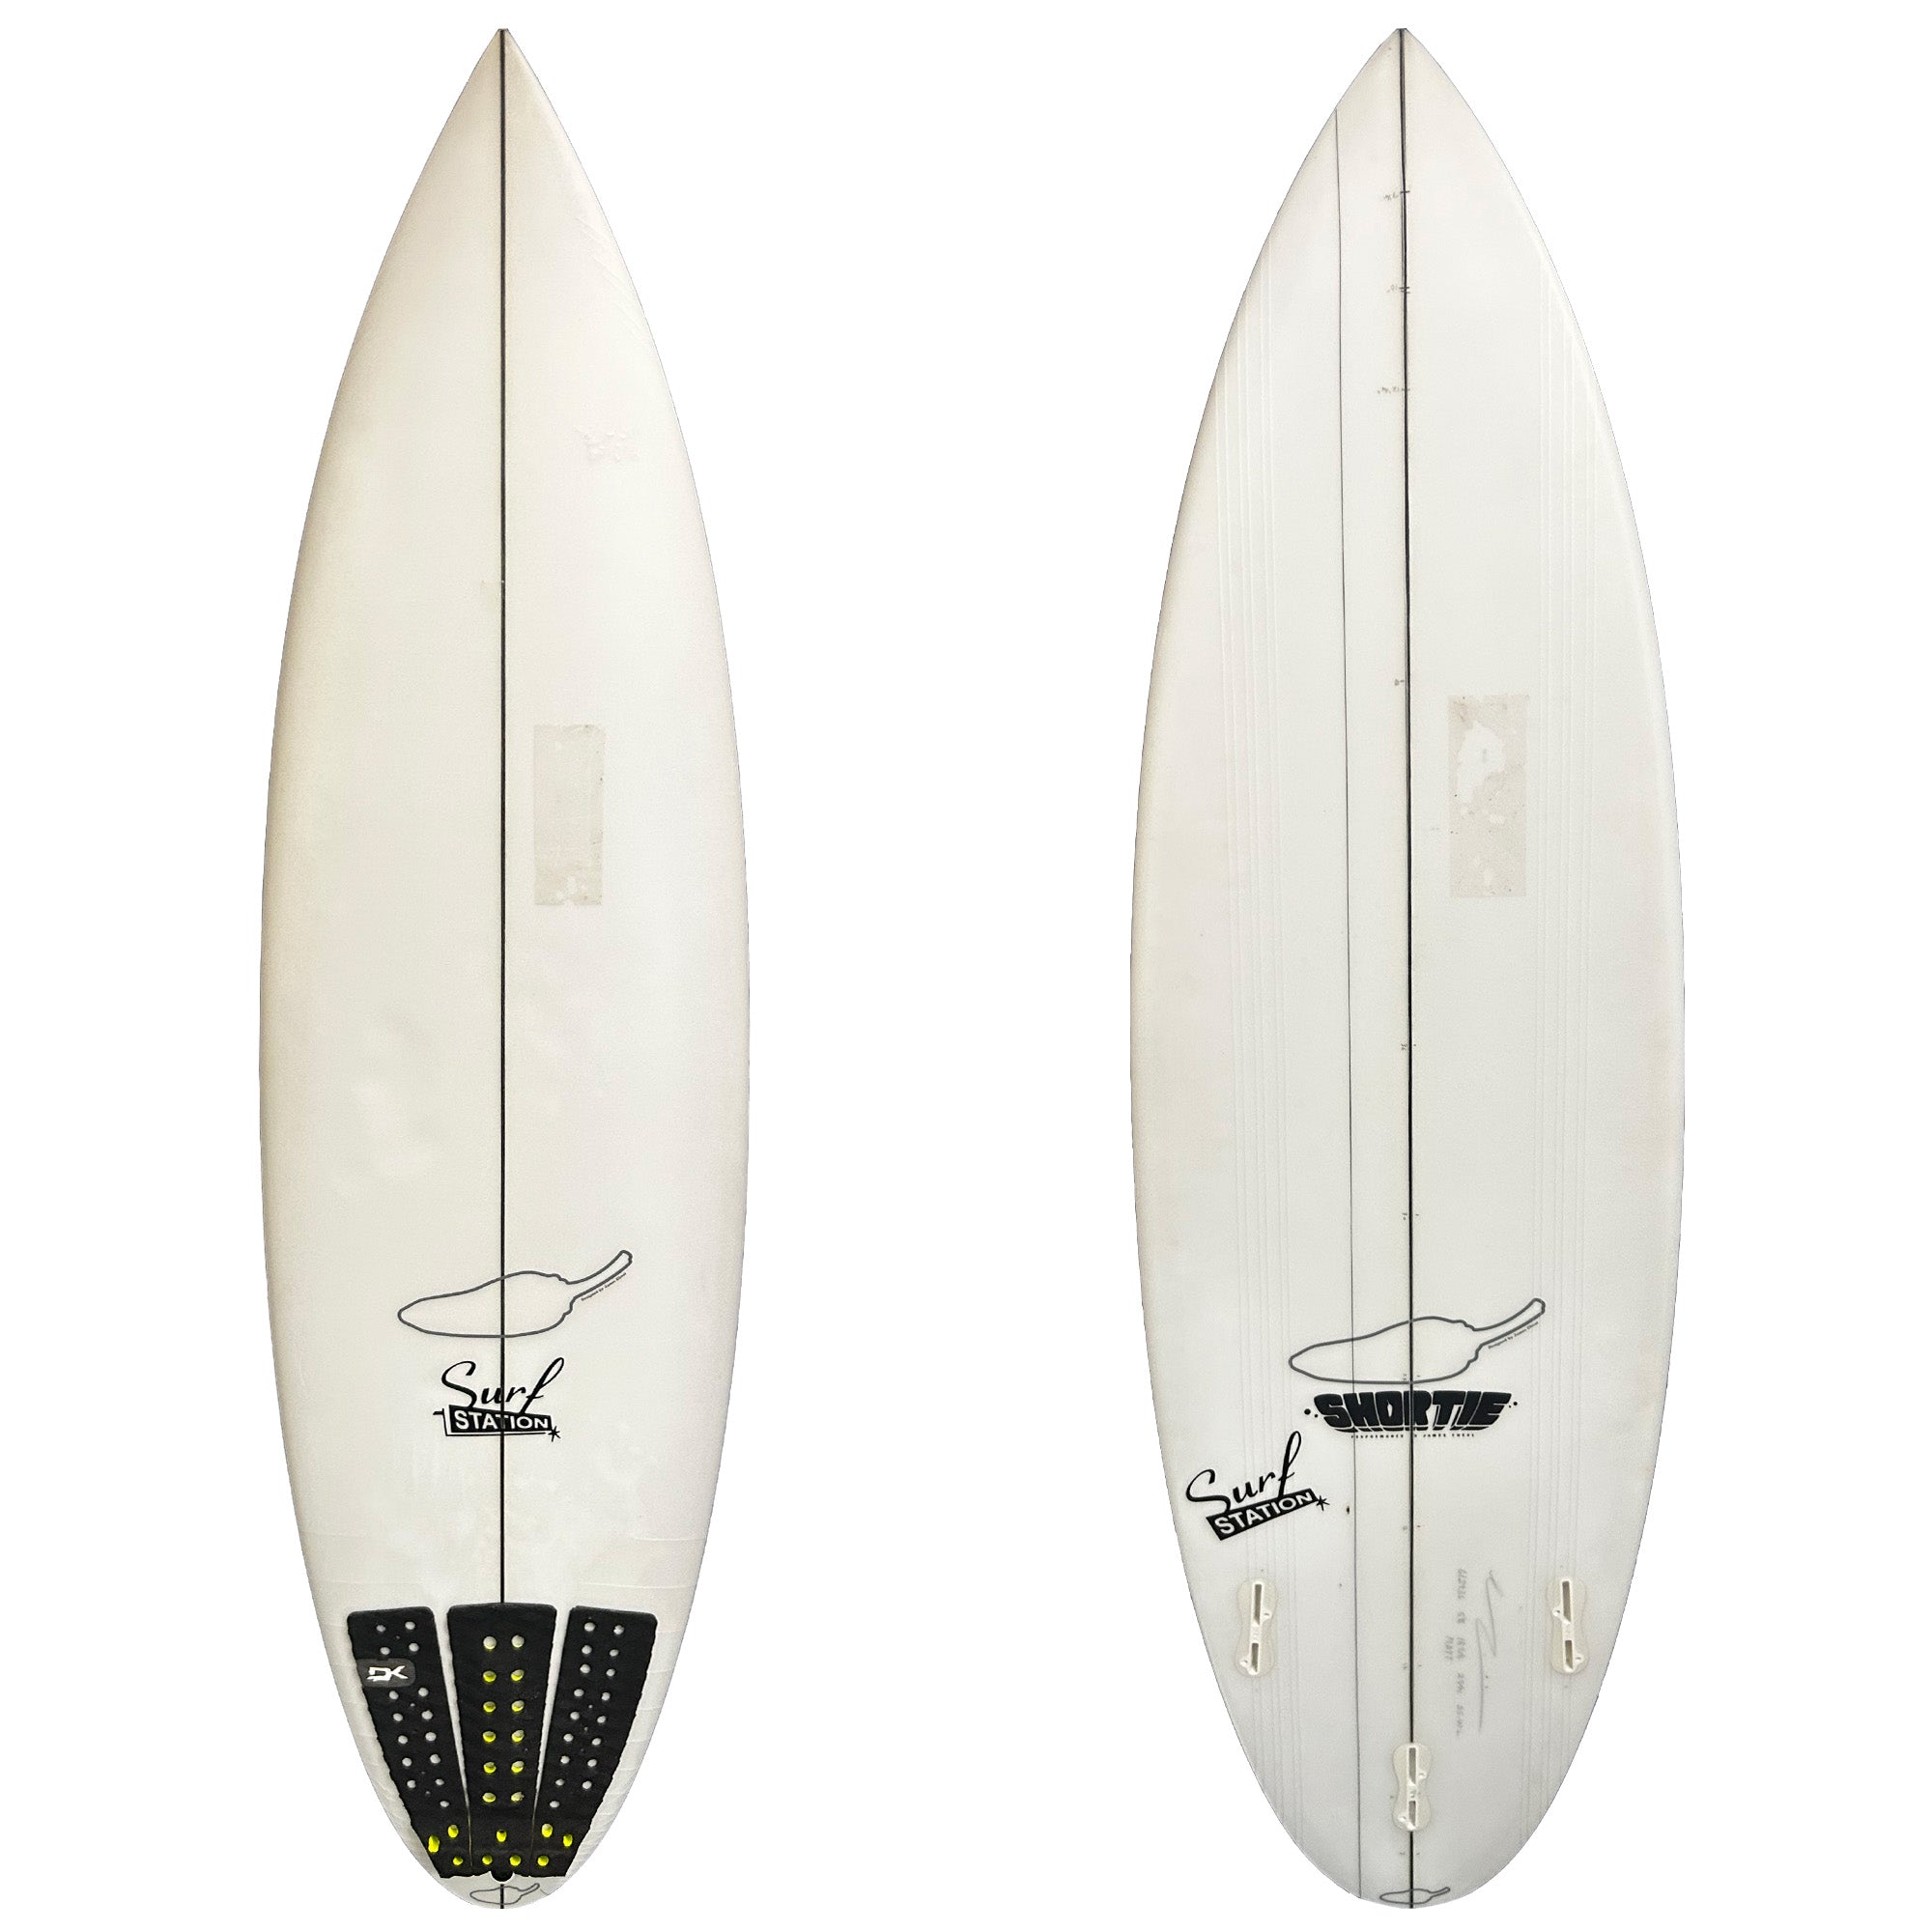 Chilli Shortie 5'8 Used Surfboard